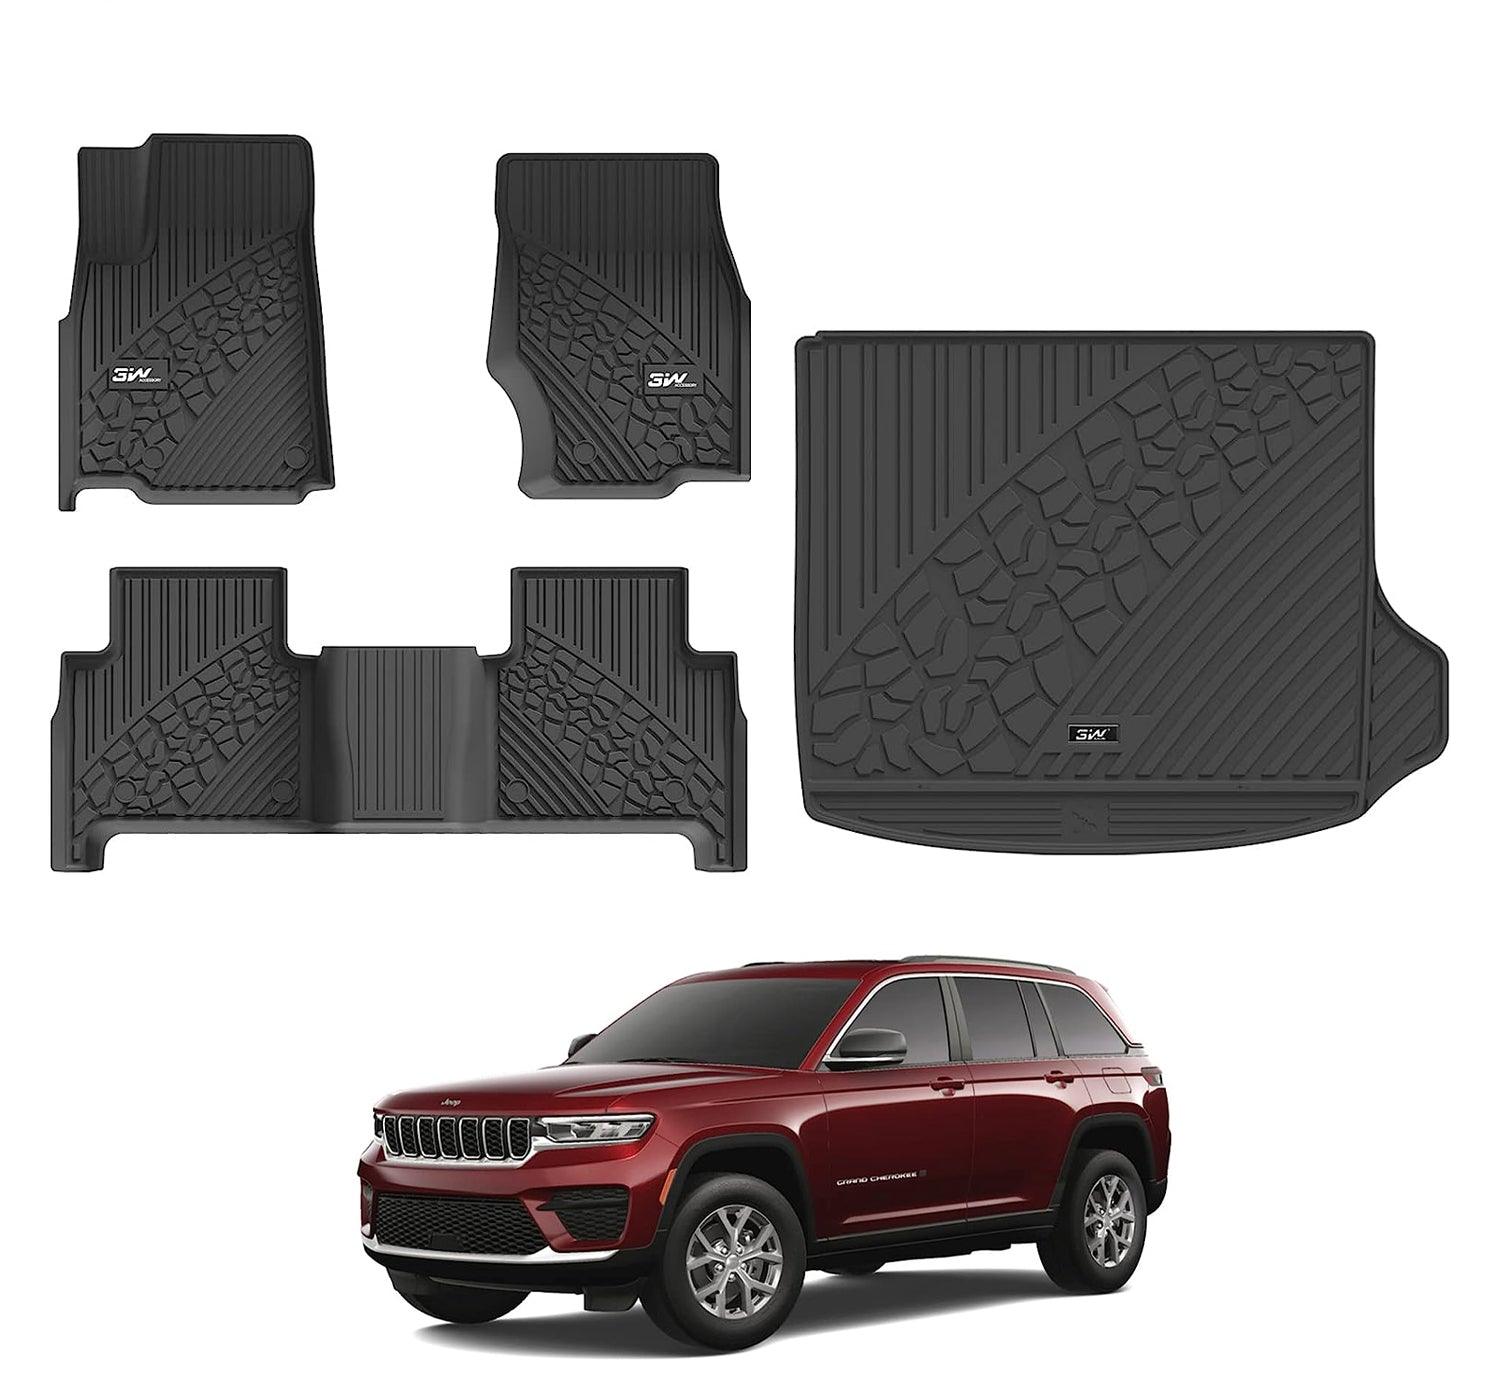 3W Jeep Grand Cherokee 2022-2024 (Non L or WK) Custom Floor Mats / Trunk Mat TPE Material & All-Weather Protection Vehicles & Parts 3Wliners 2022-2024 Grand Cherokee 2022-2024 1st&2nd Row Mats+Trunk Mat